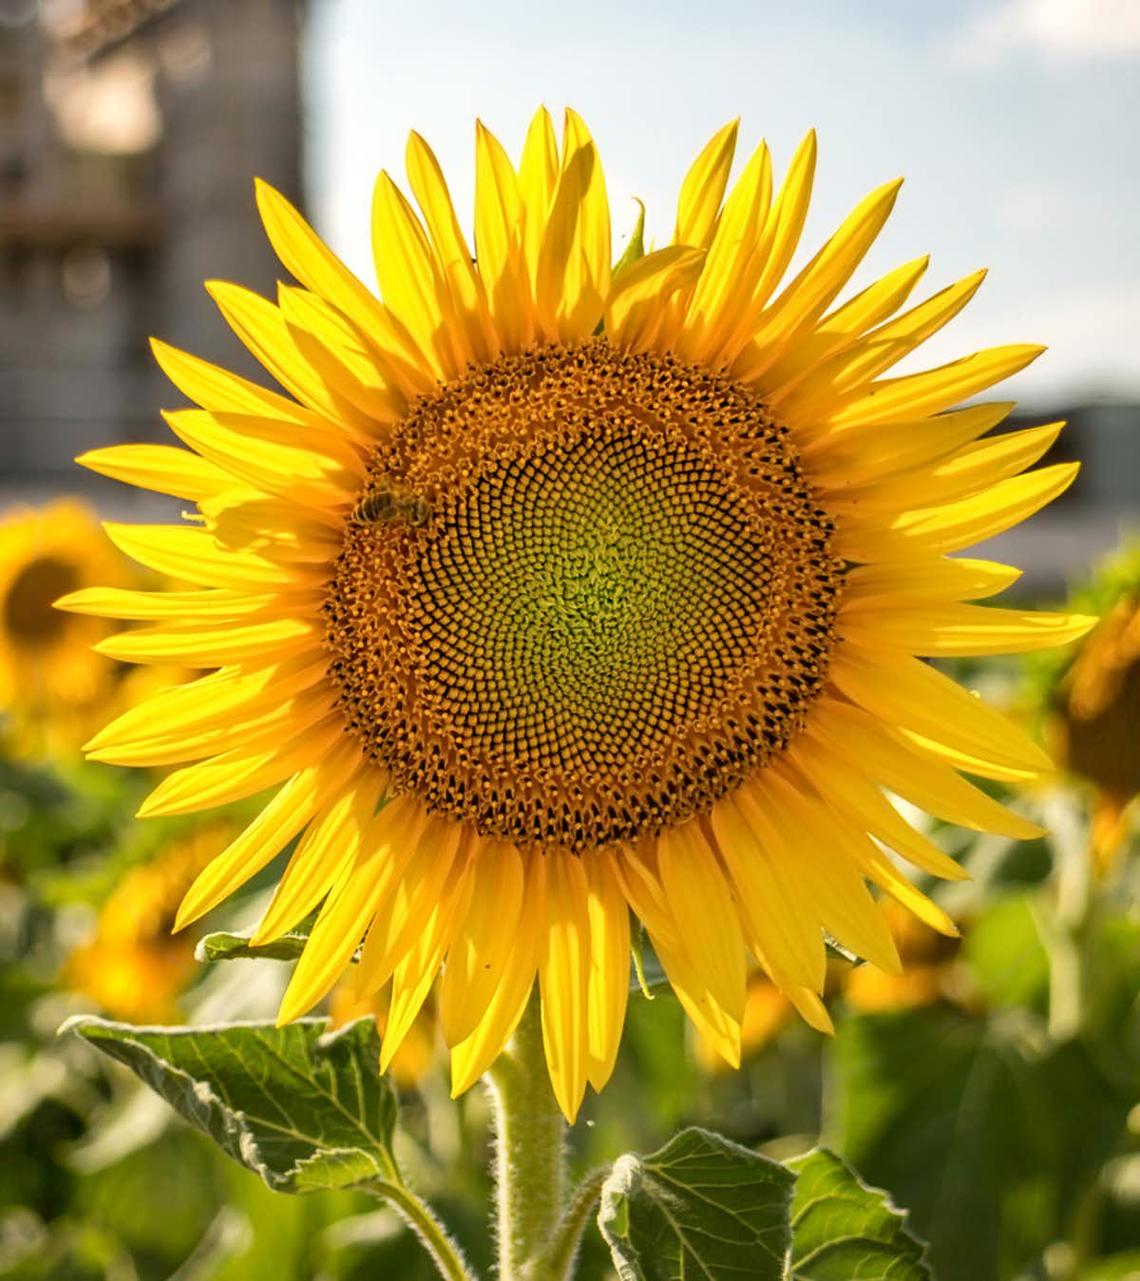 Sunflower, one of many flowers grown in Community Roots gardens.